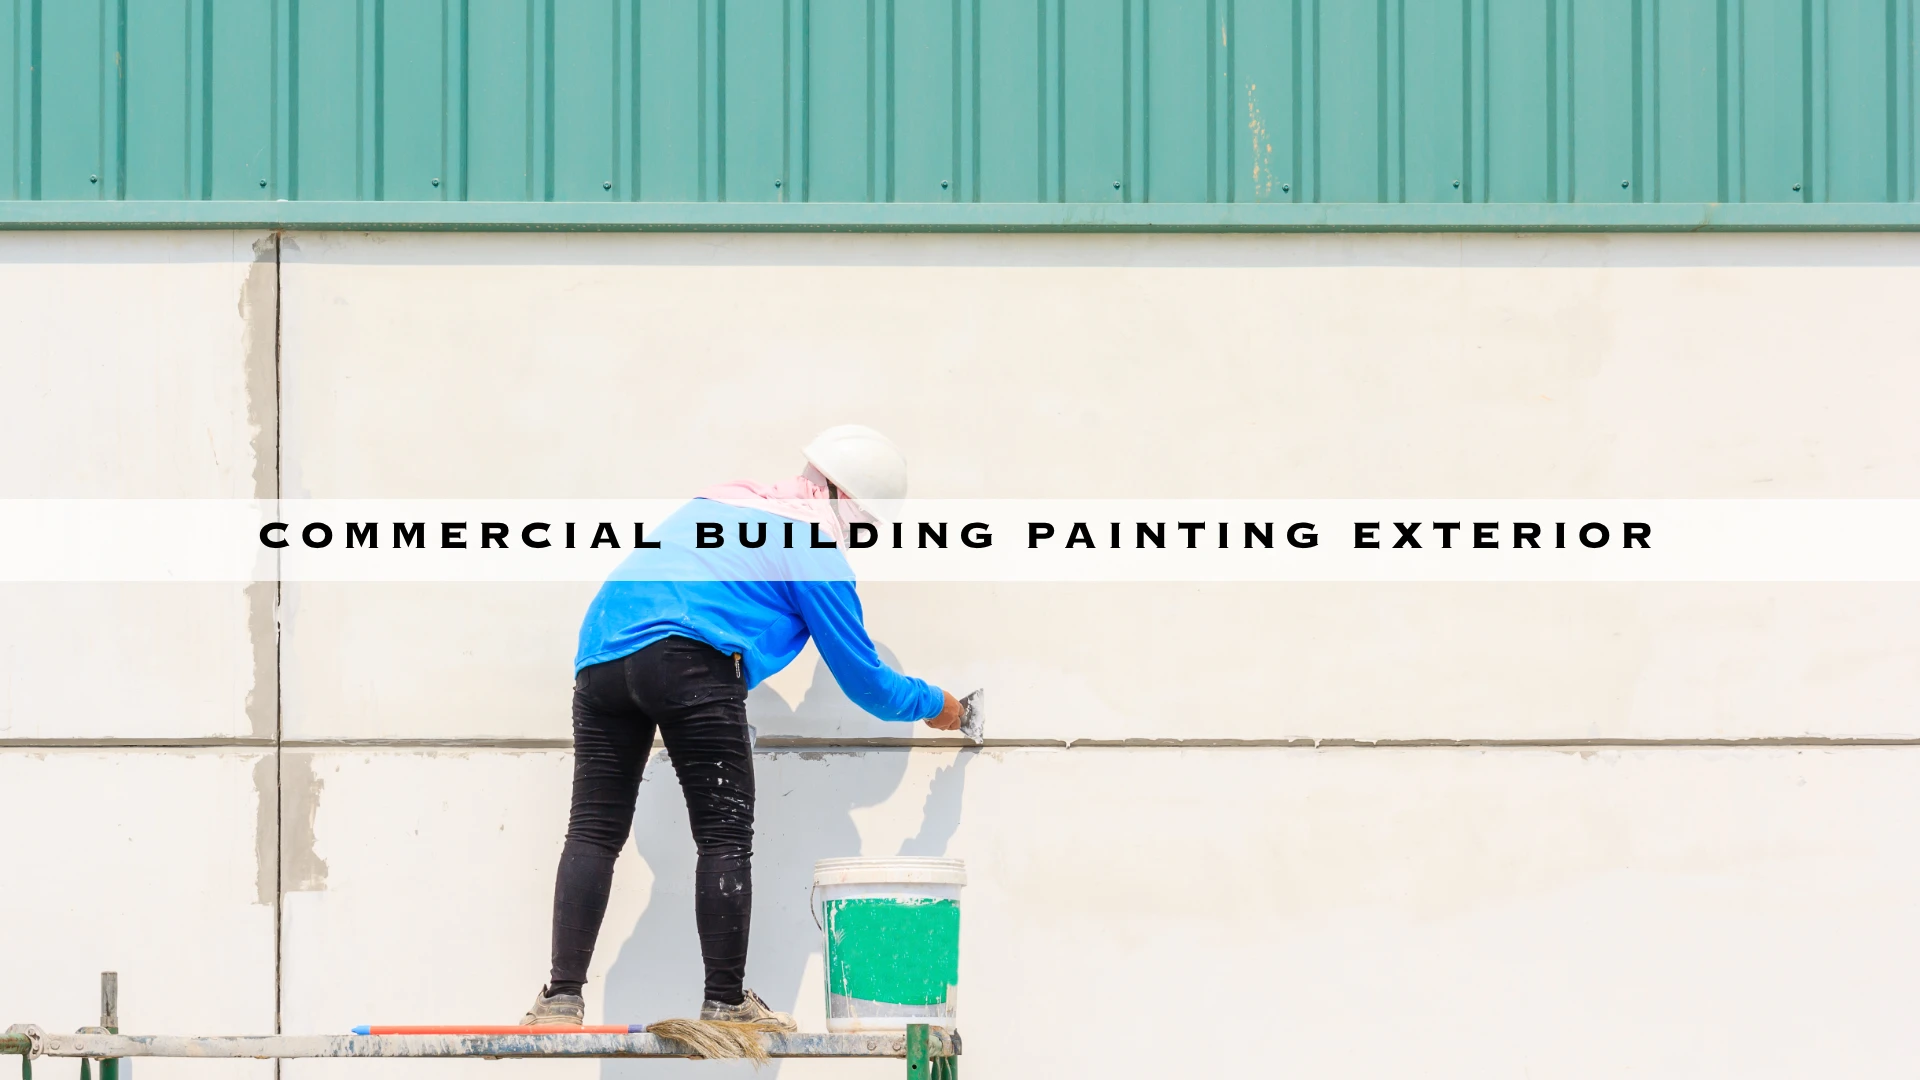 COMMERCIAL BUILDING PAINTING EXTERIOR